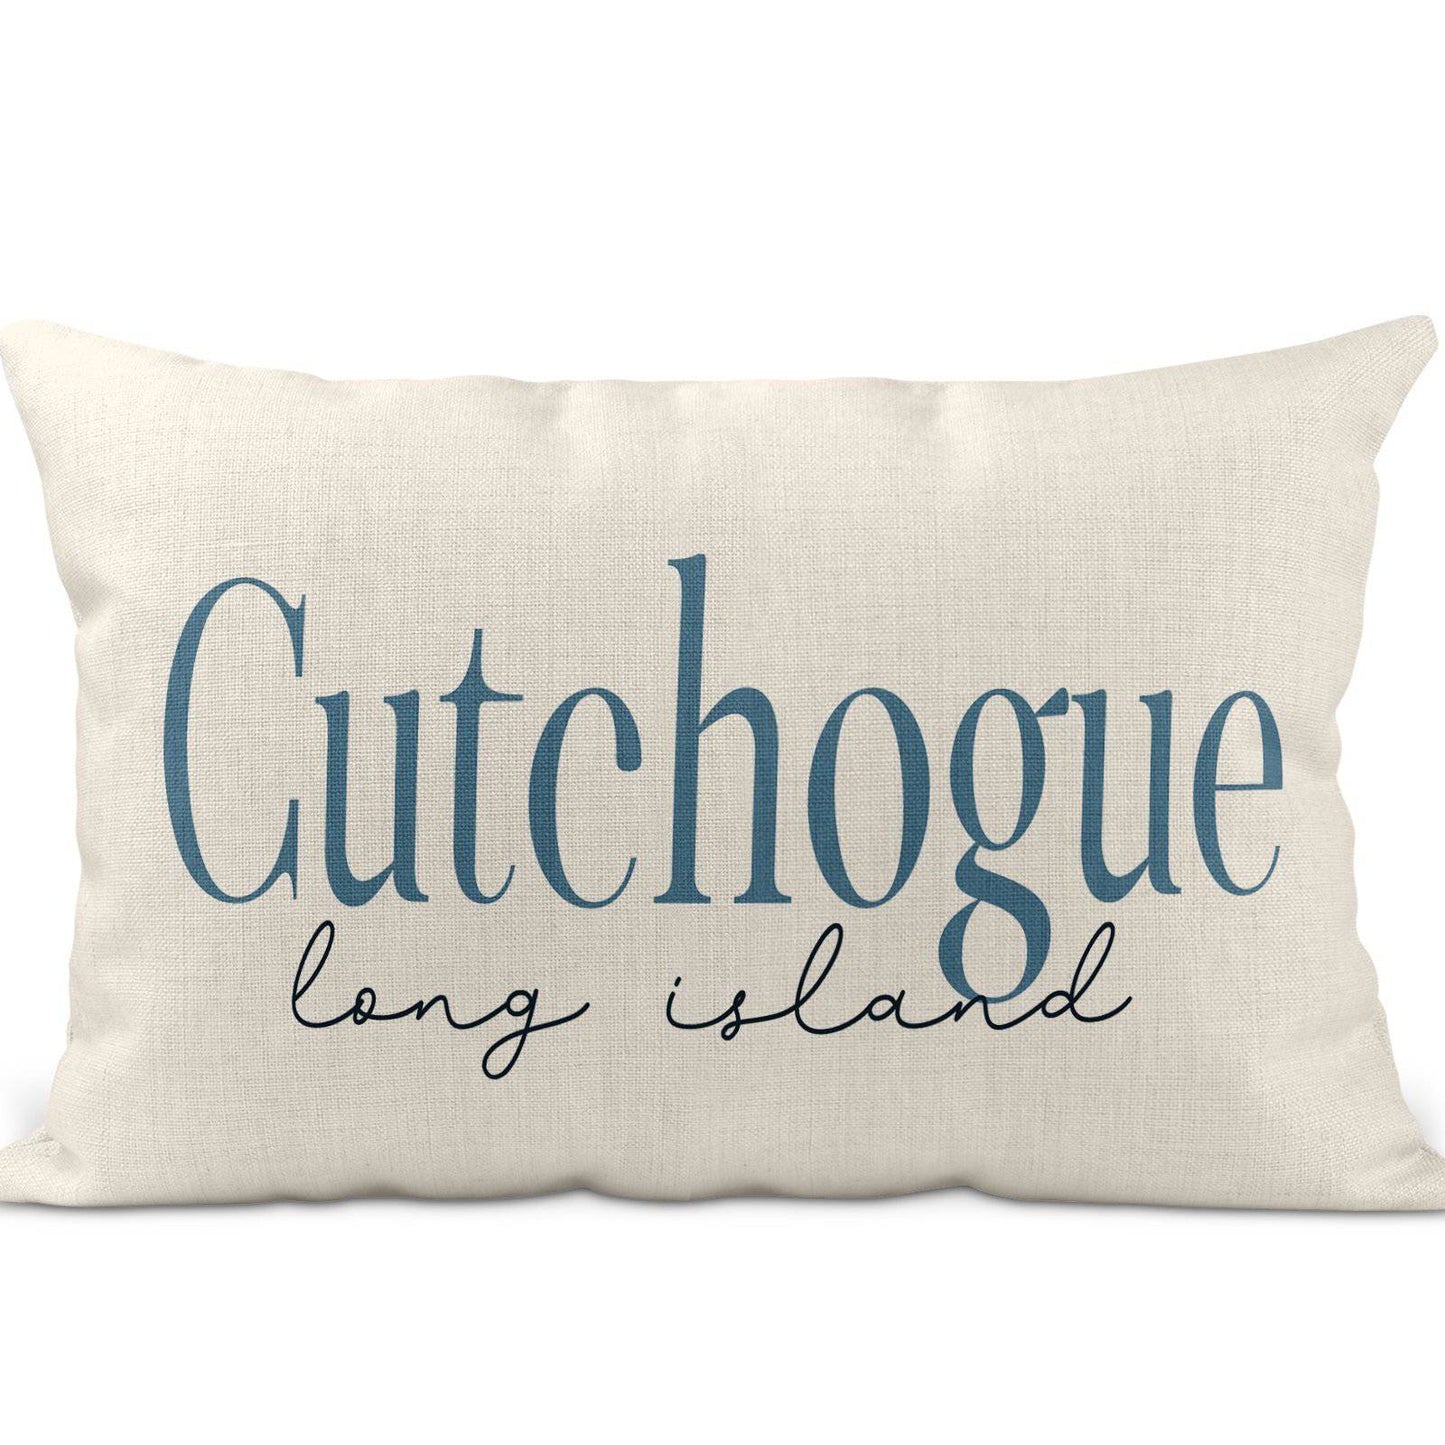 Cutchogue Long Island Pillow - Globally Crafted